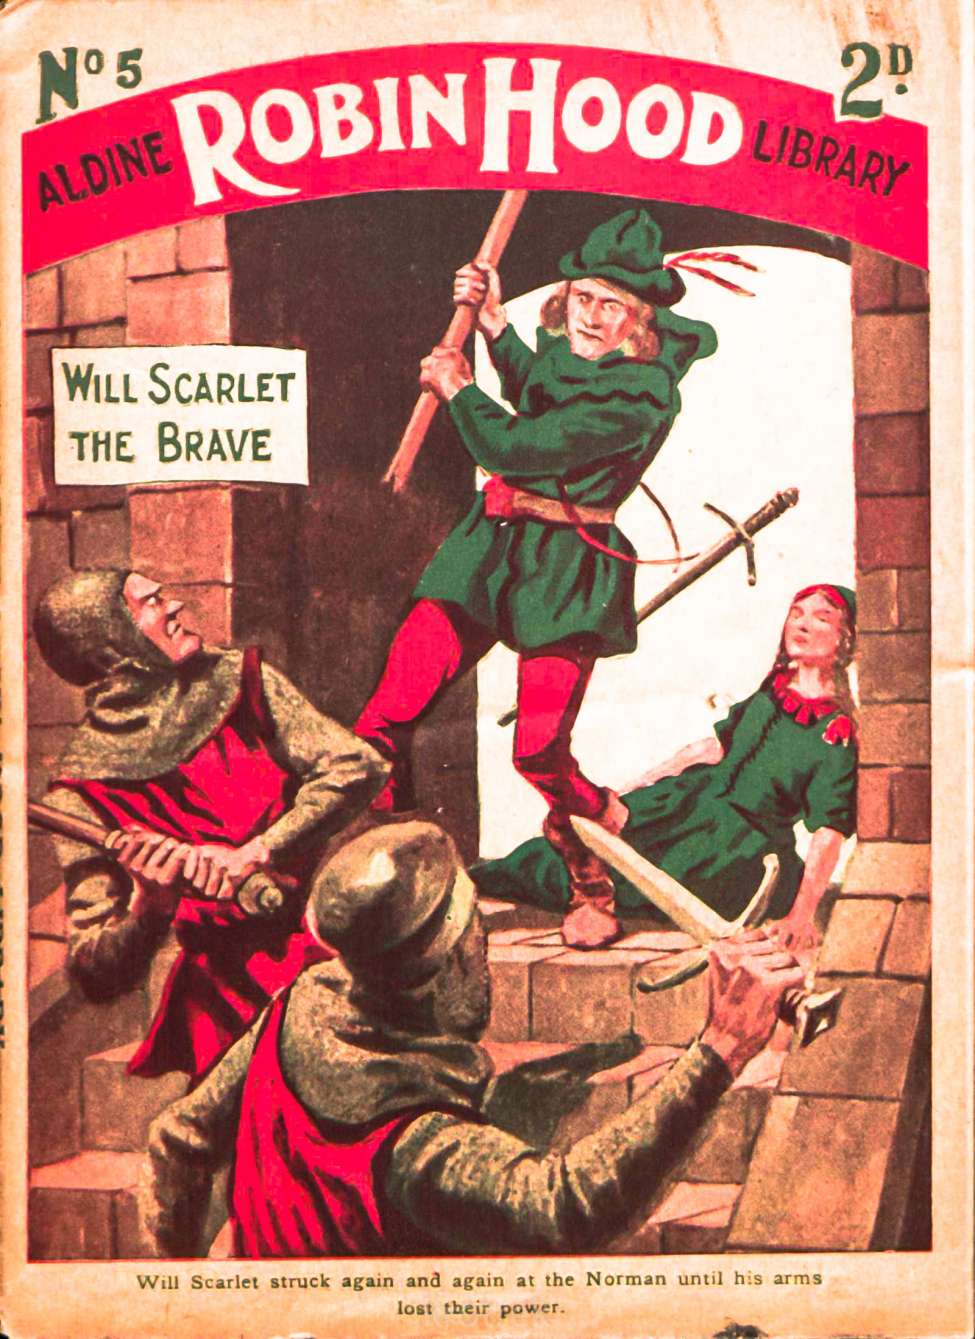 Book Cover For Aldine Robin Hood Library 5 - Will Scarlet the Brave